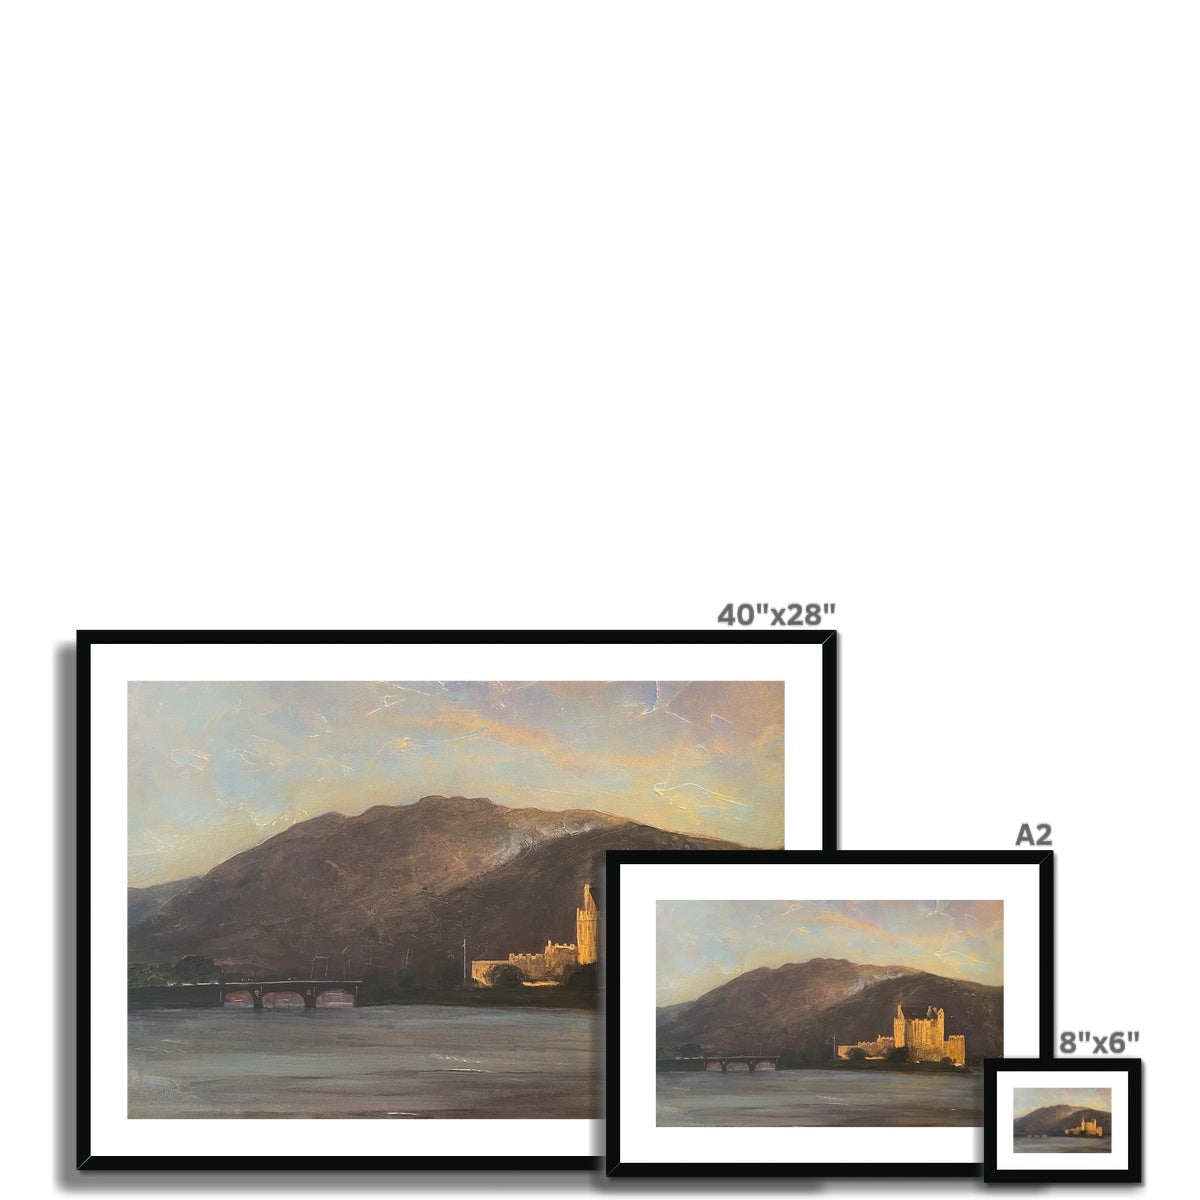 Eilean Donan Castle Painting | Framed & Mounted Prints From Scotland-Framed & Mounted Prints-Historic & Iconic Scotland Art Gallery-Paintings, Prints, Homeware, Art Gifts From Scotland By Scottish Artist Kevin Hunter